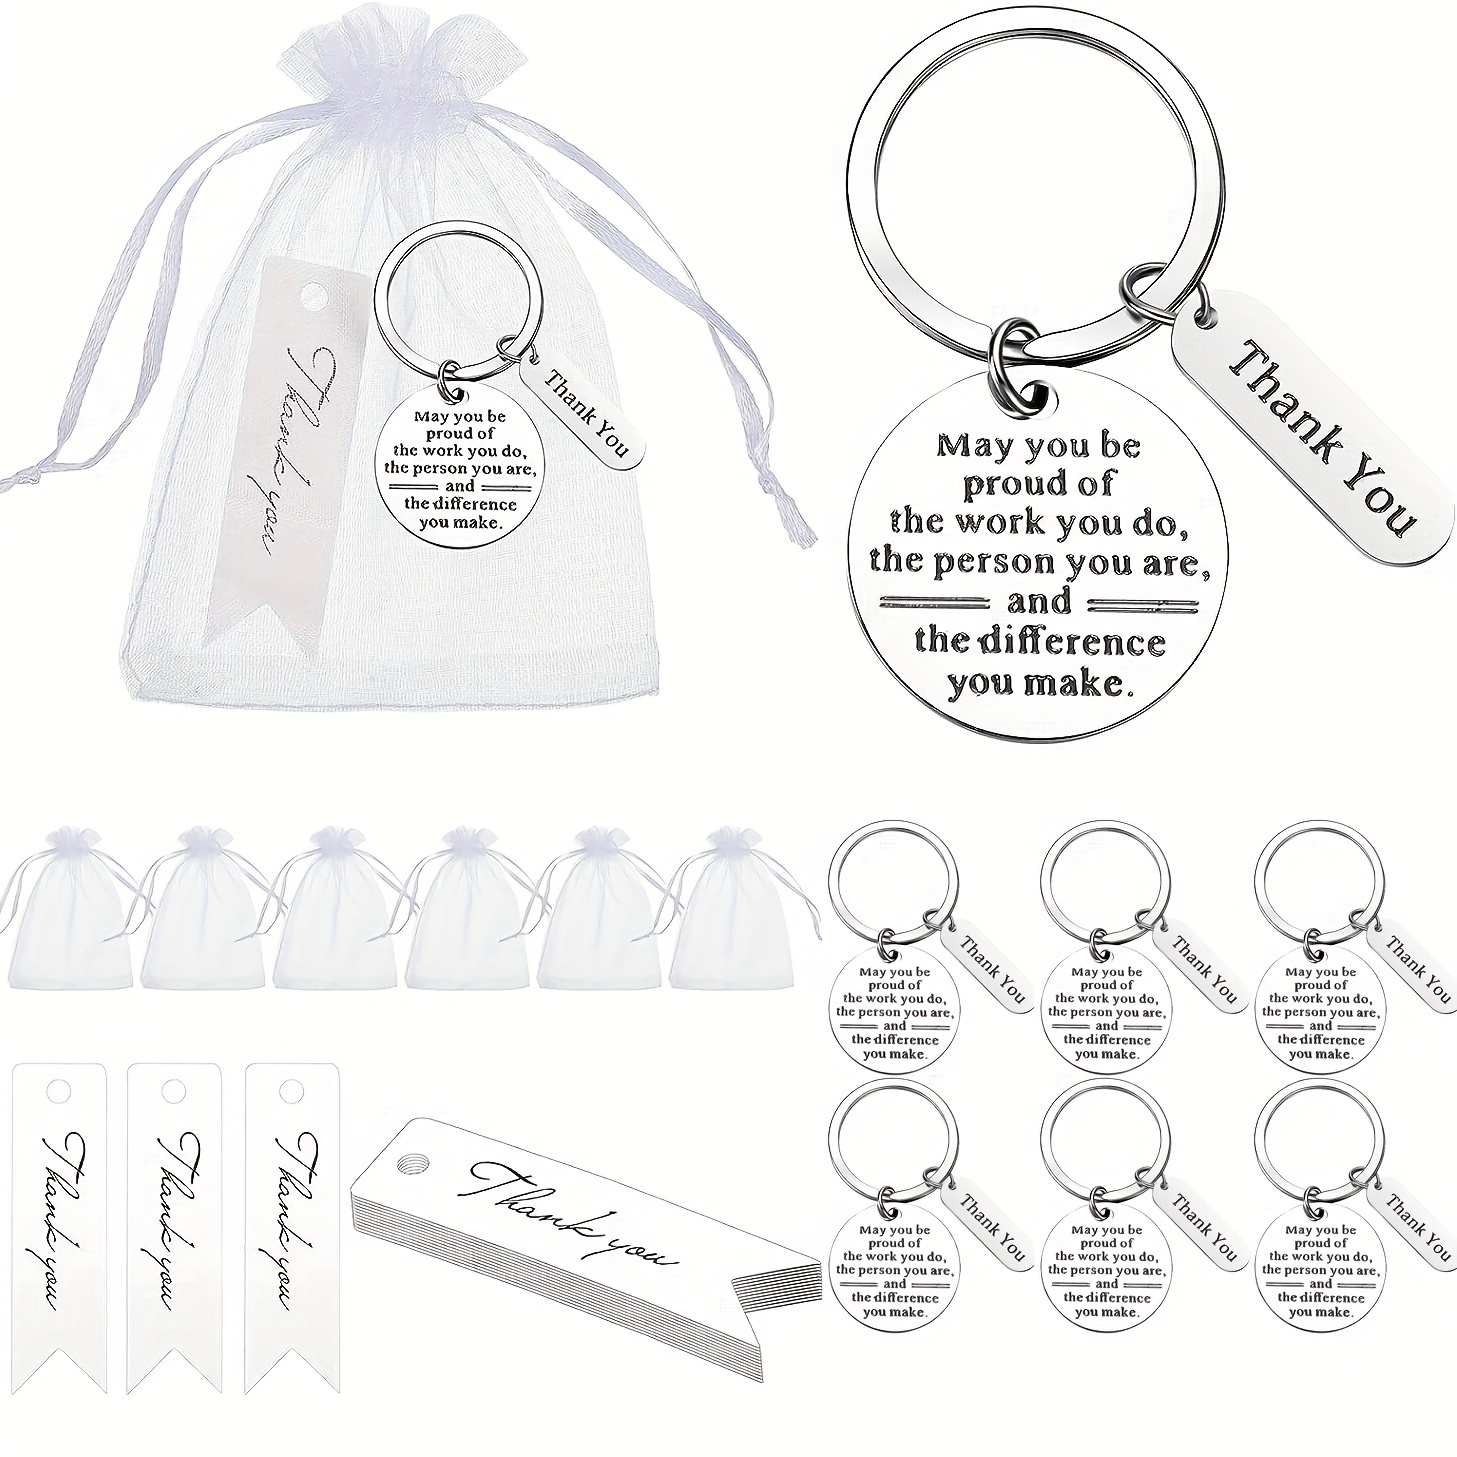 6 Pcs Gifts Keychain Appreciation Keychain Make A Difference Inspirational  Gifts Coworker Leaving G